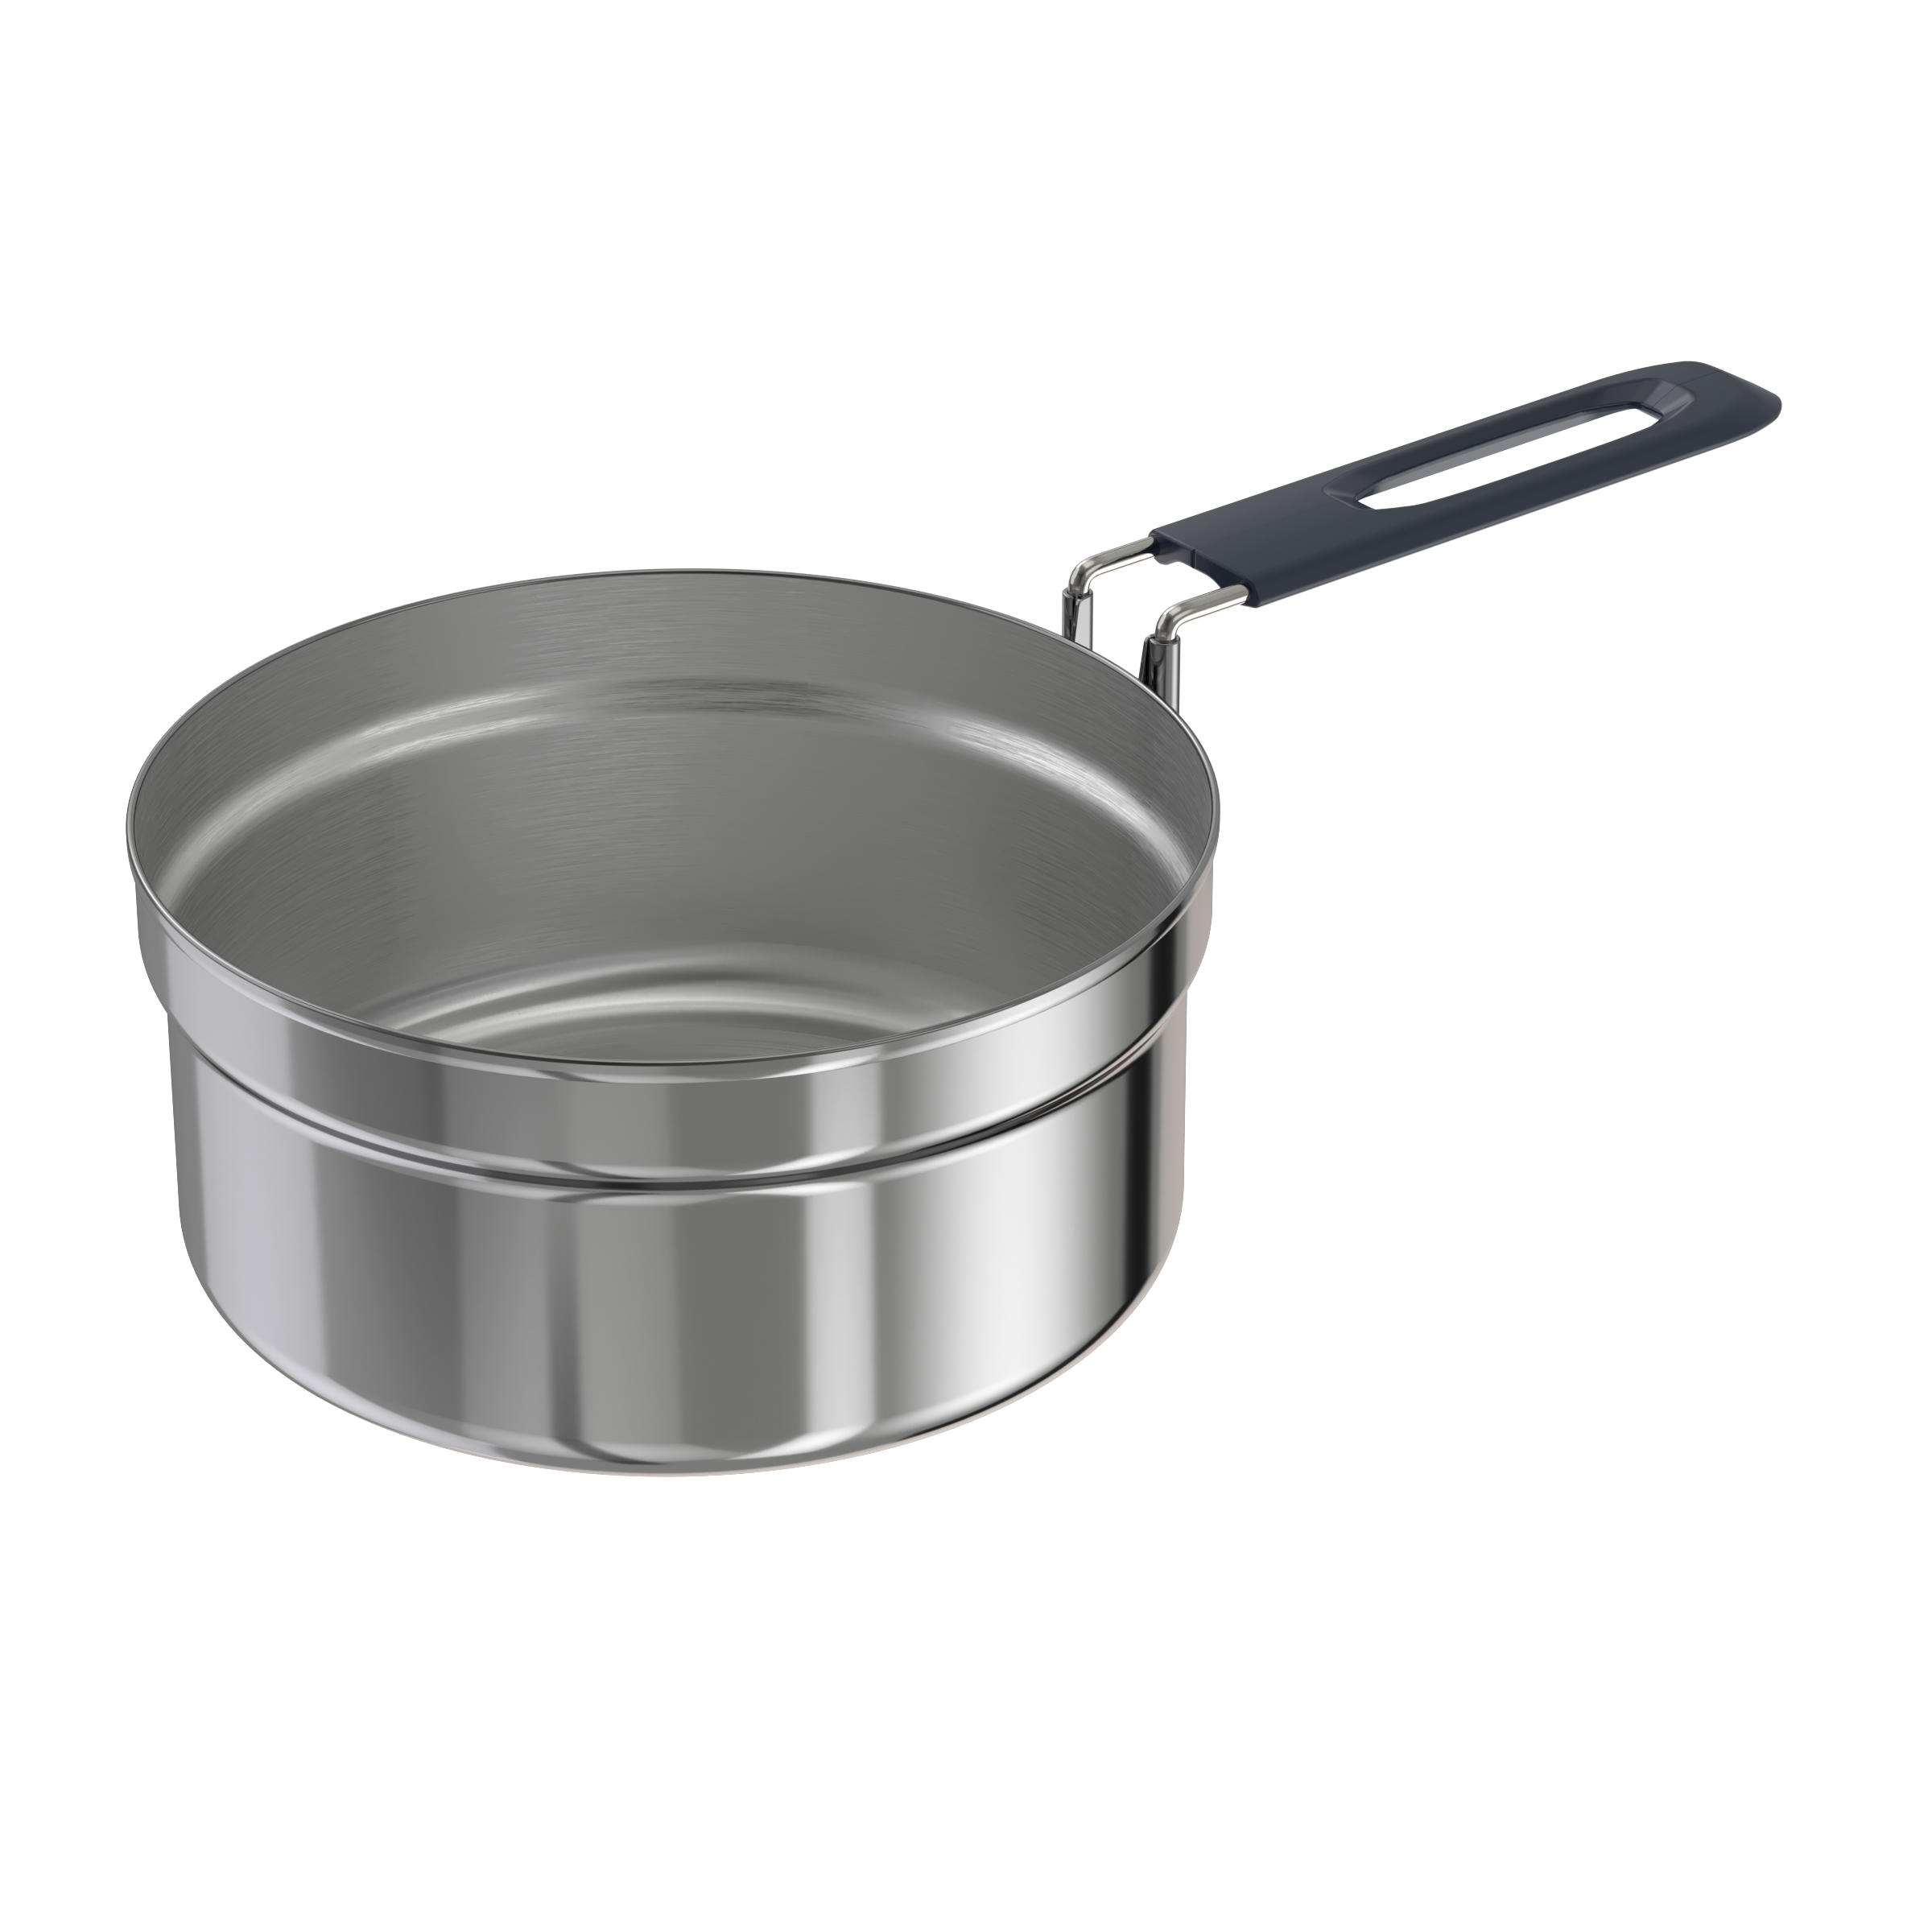 MH 100 Stainless Hiking Camp Cookset 2P  - QUECHUA